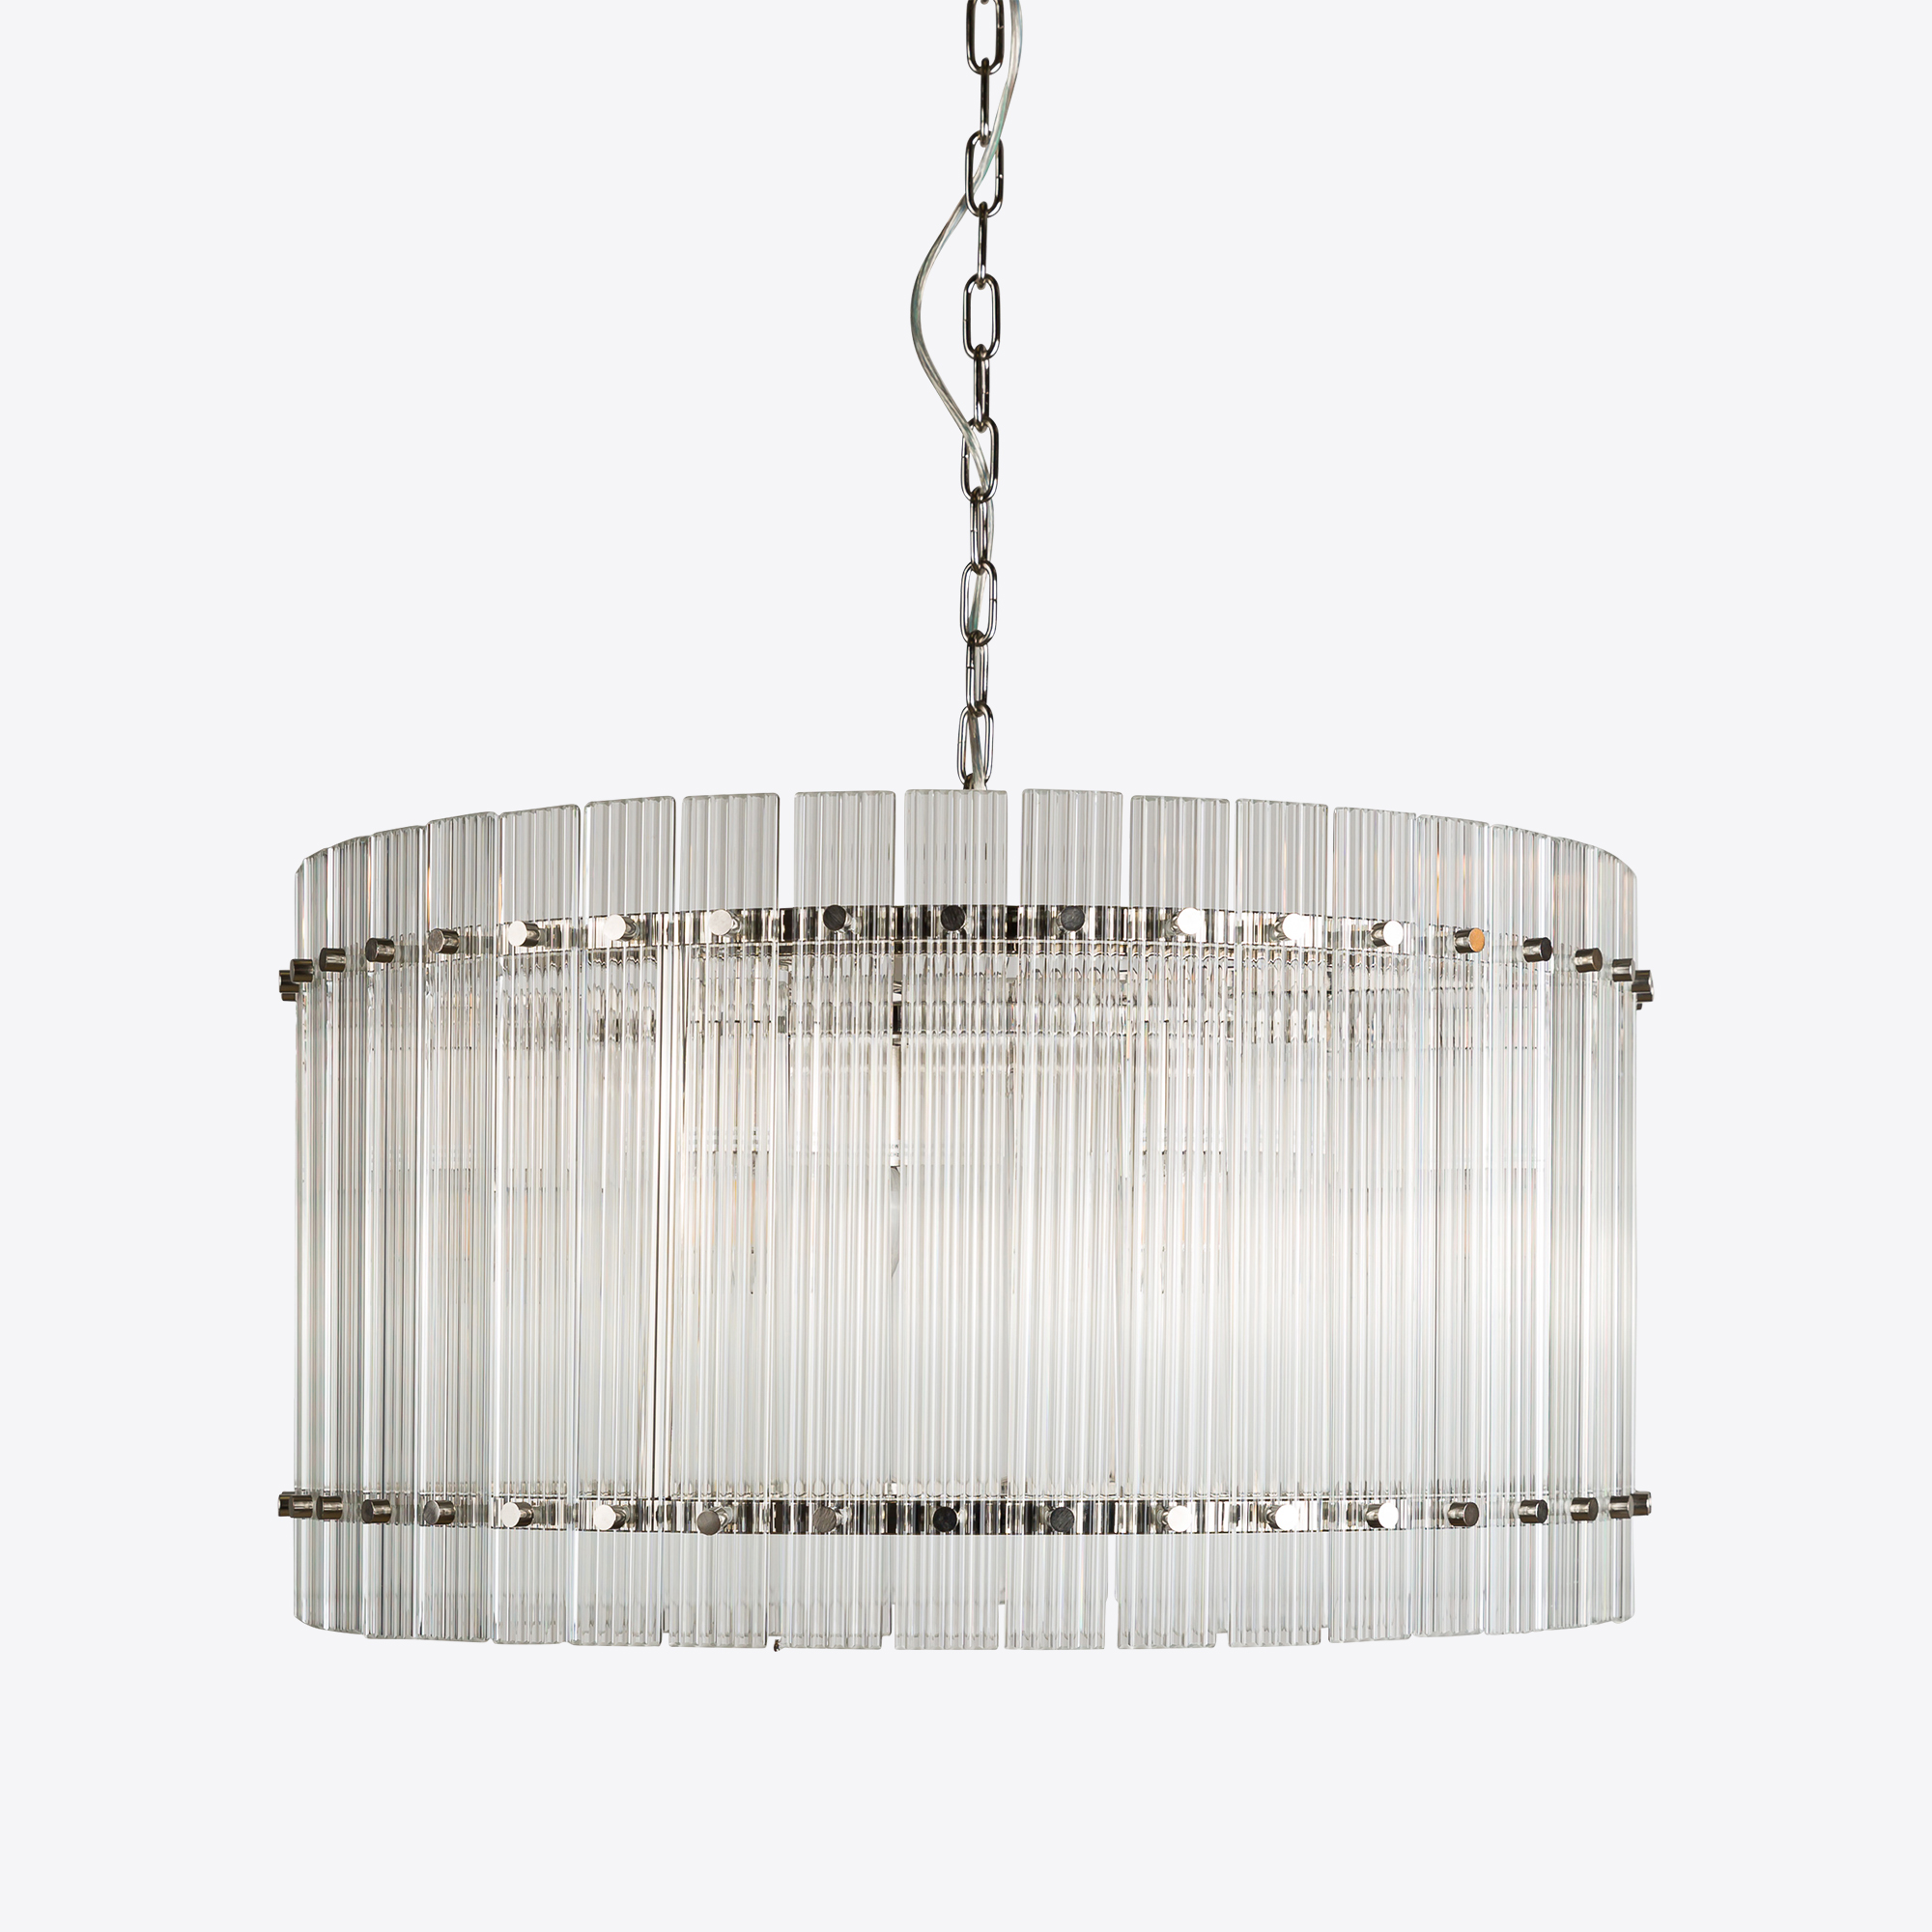 Nickel San Francisco Chandelier - 2 Sizes Available